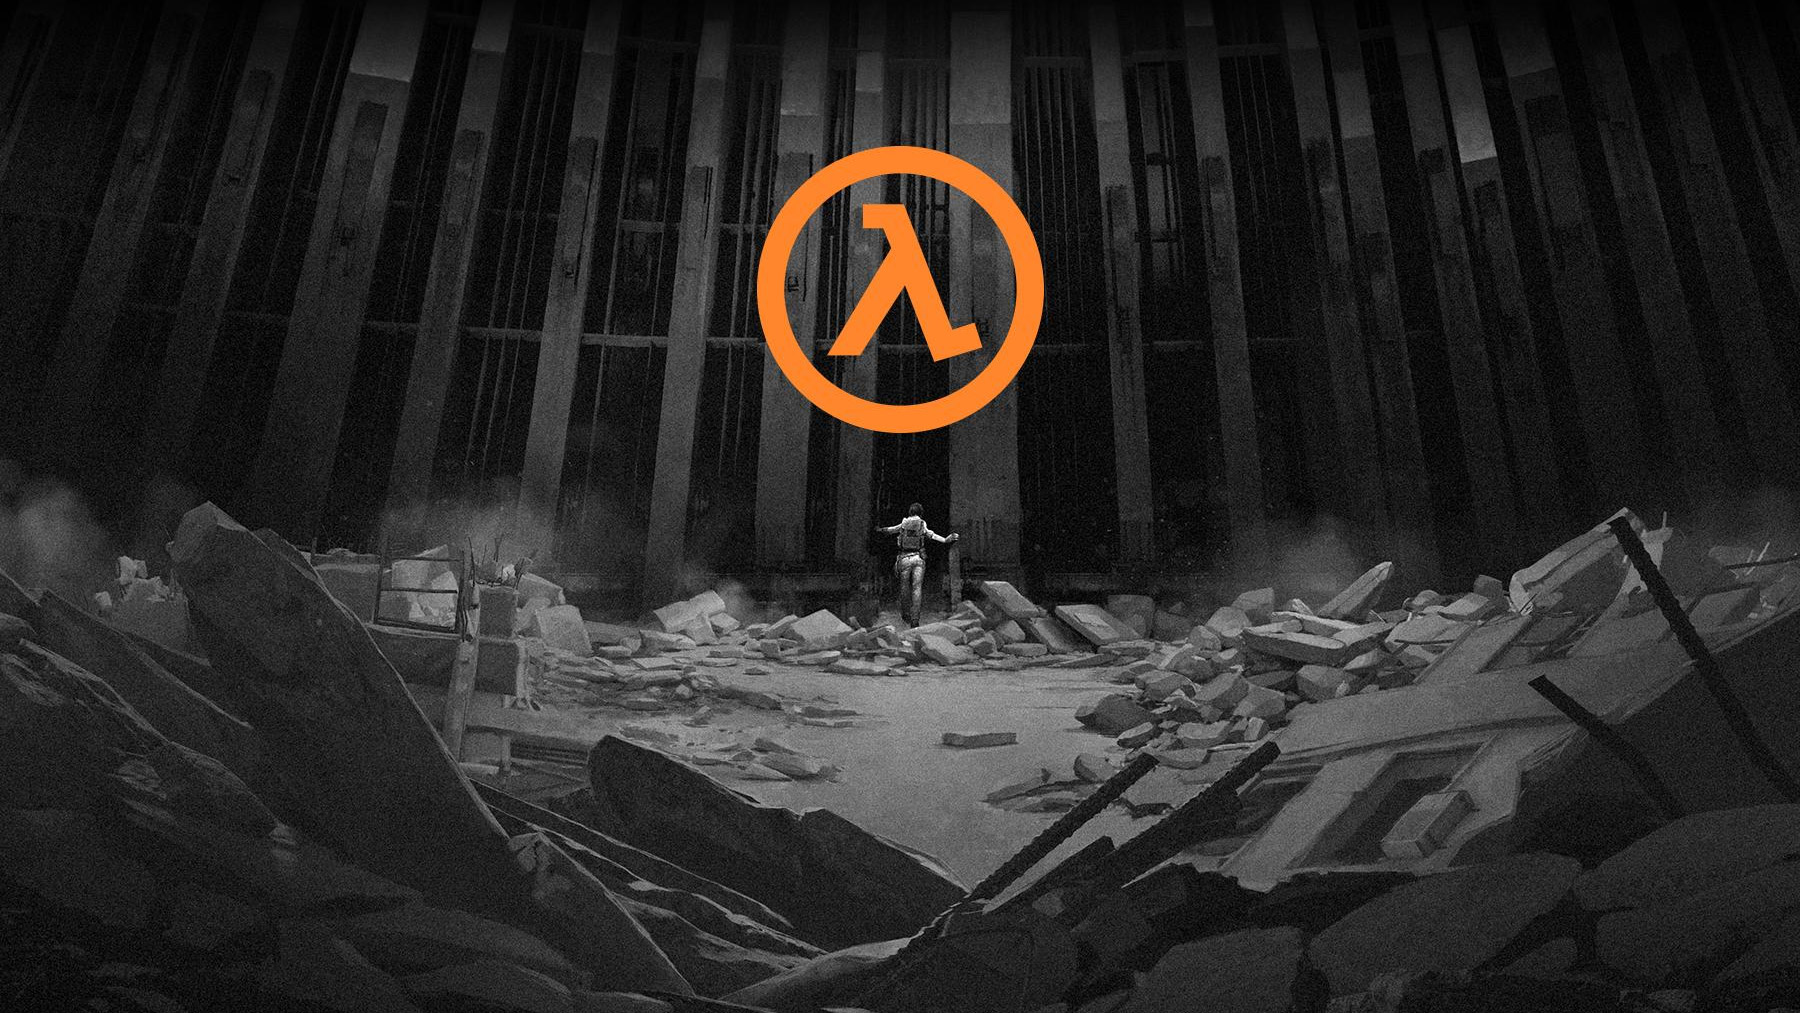 Half-Life Game Series Will Finally Return With VR-Based Project